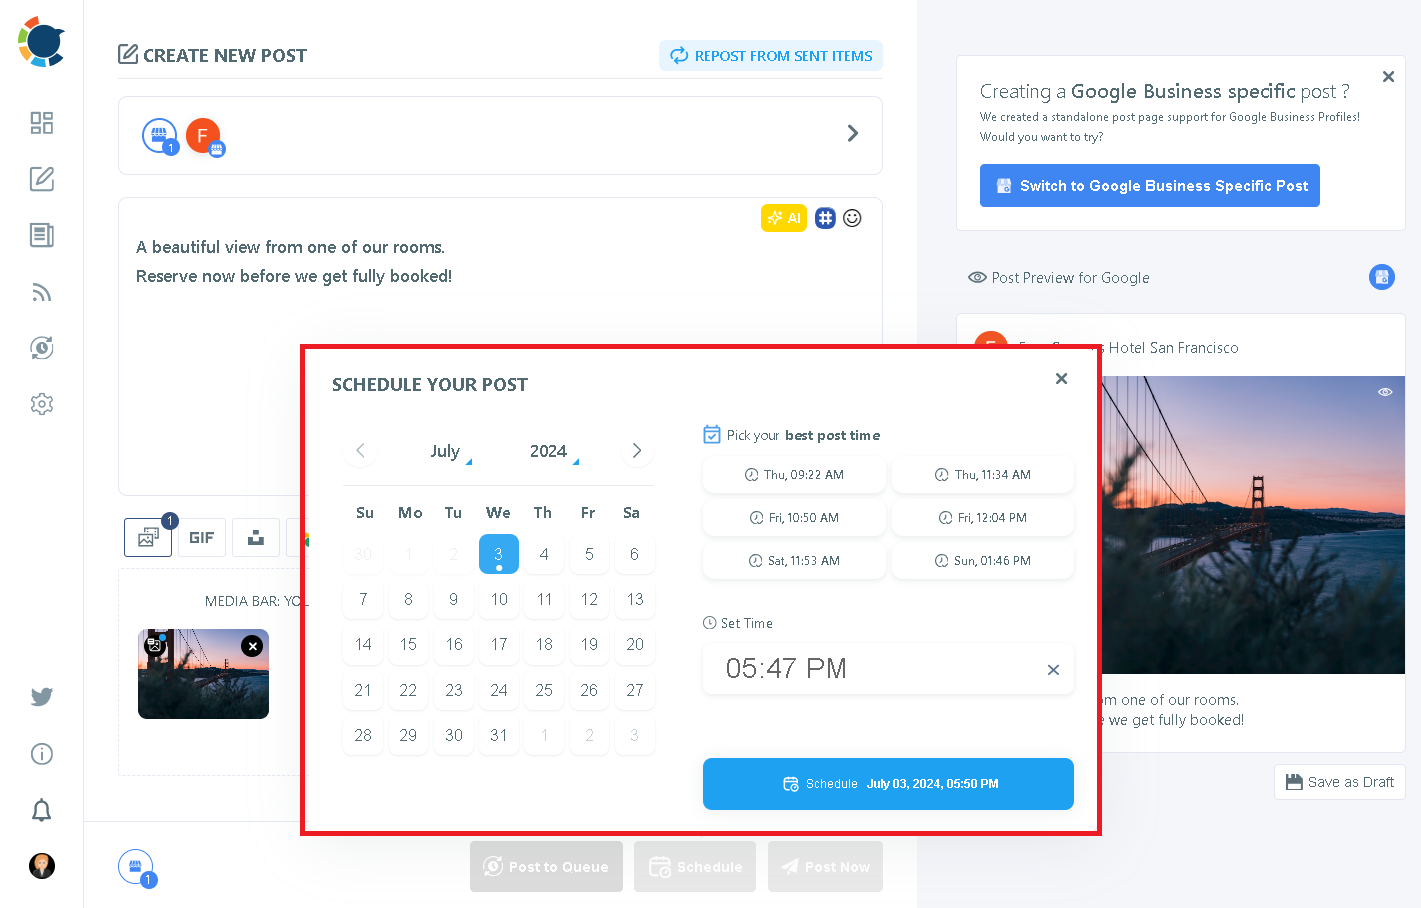 Post, schedule, or add to queue your designed Google Business Profile posts to be posted at the best time for Google Business Profile!